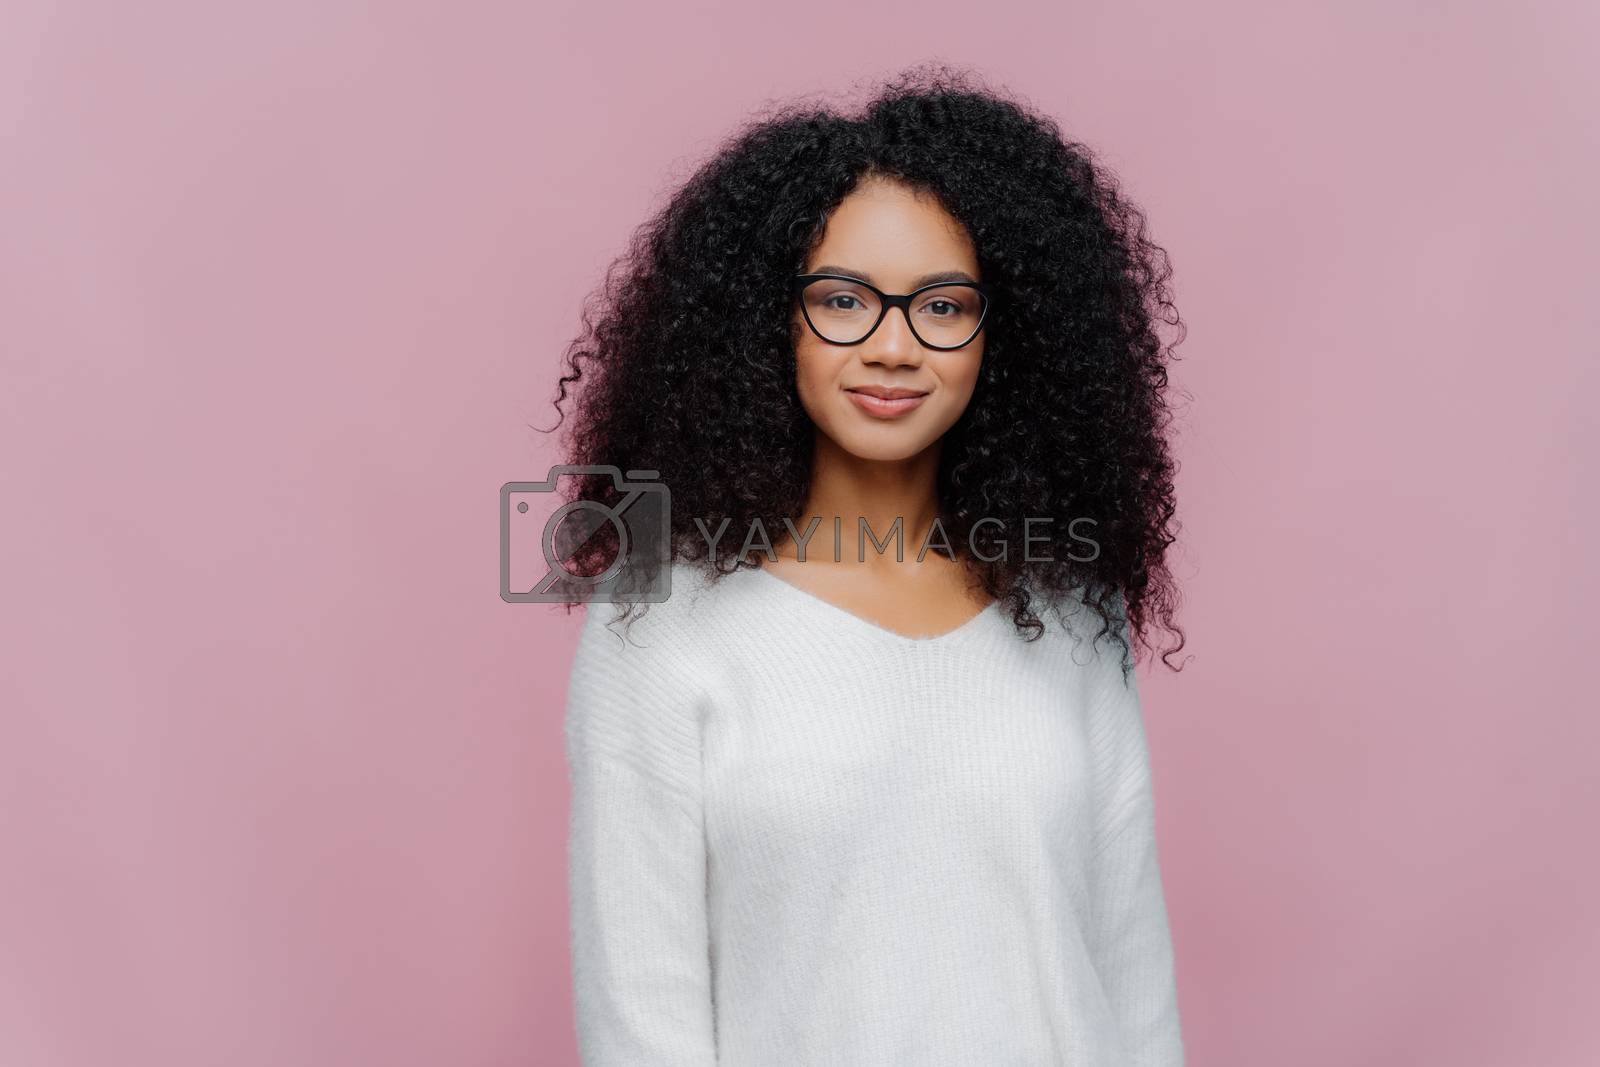 Royalty free image of Half length shot of attractive African American woman looks through transparent glasses, white sweater, has serious calm expression, poses against violet studio wall. Facial expressions concept by vkstock